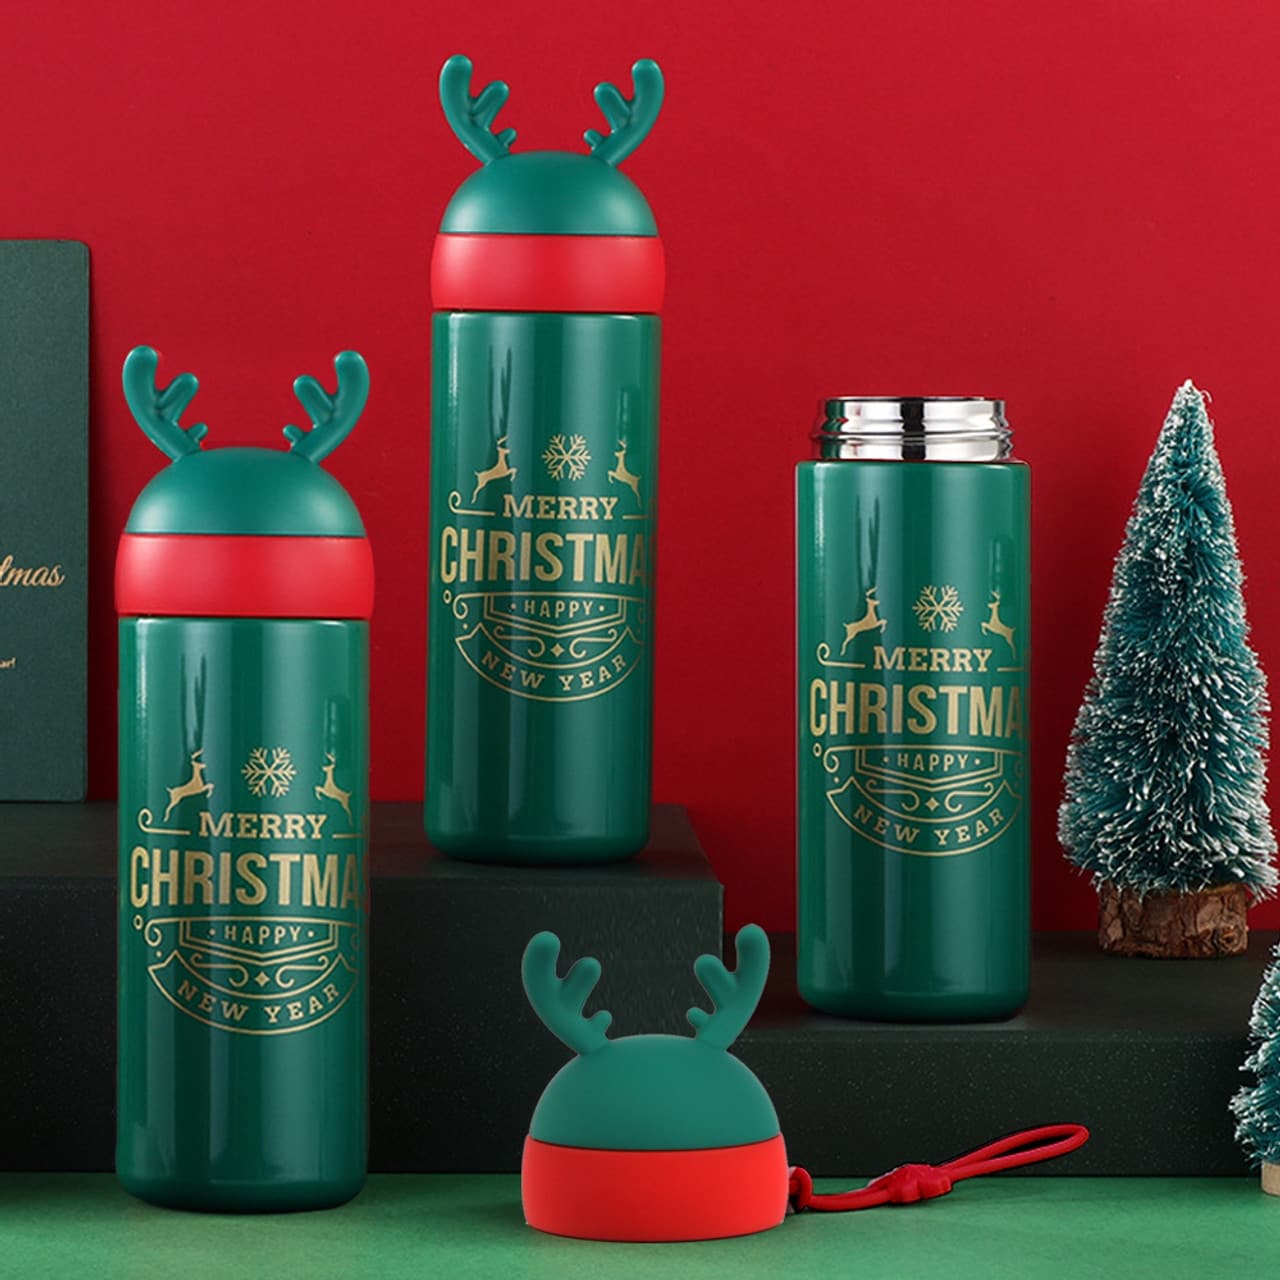 https://ak1.ostkcdn.com/images/products/is/images/direct/7c31c374584528dd654d1038fc6a5c728407336f/Reindeer-Coffee-Tumbler-Insulated-Metal-Christmas-Thermos-Cup-Hot-Cold-Screw-Lid.jpg